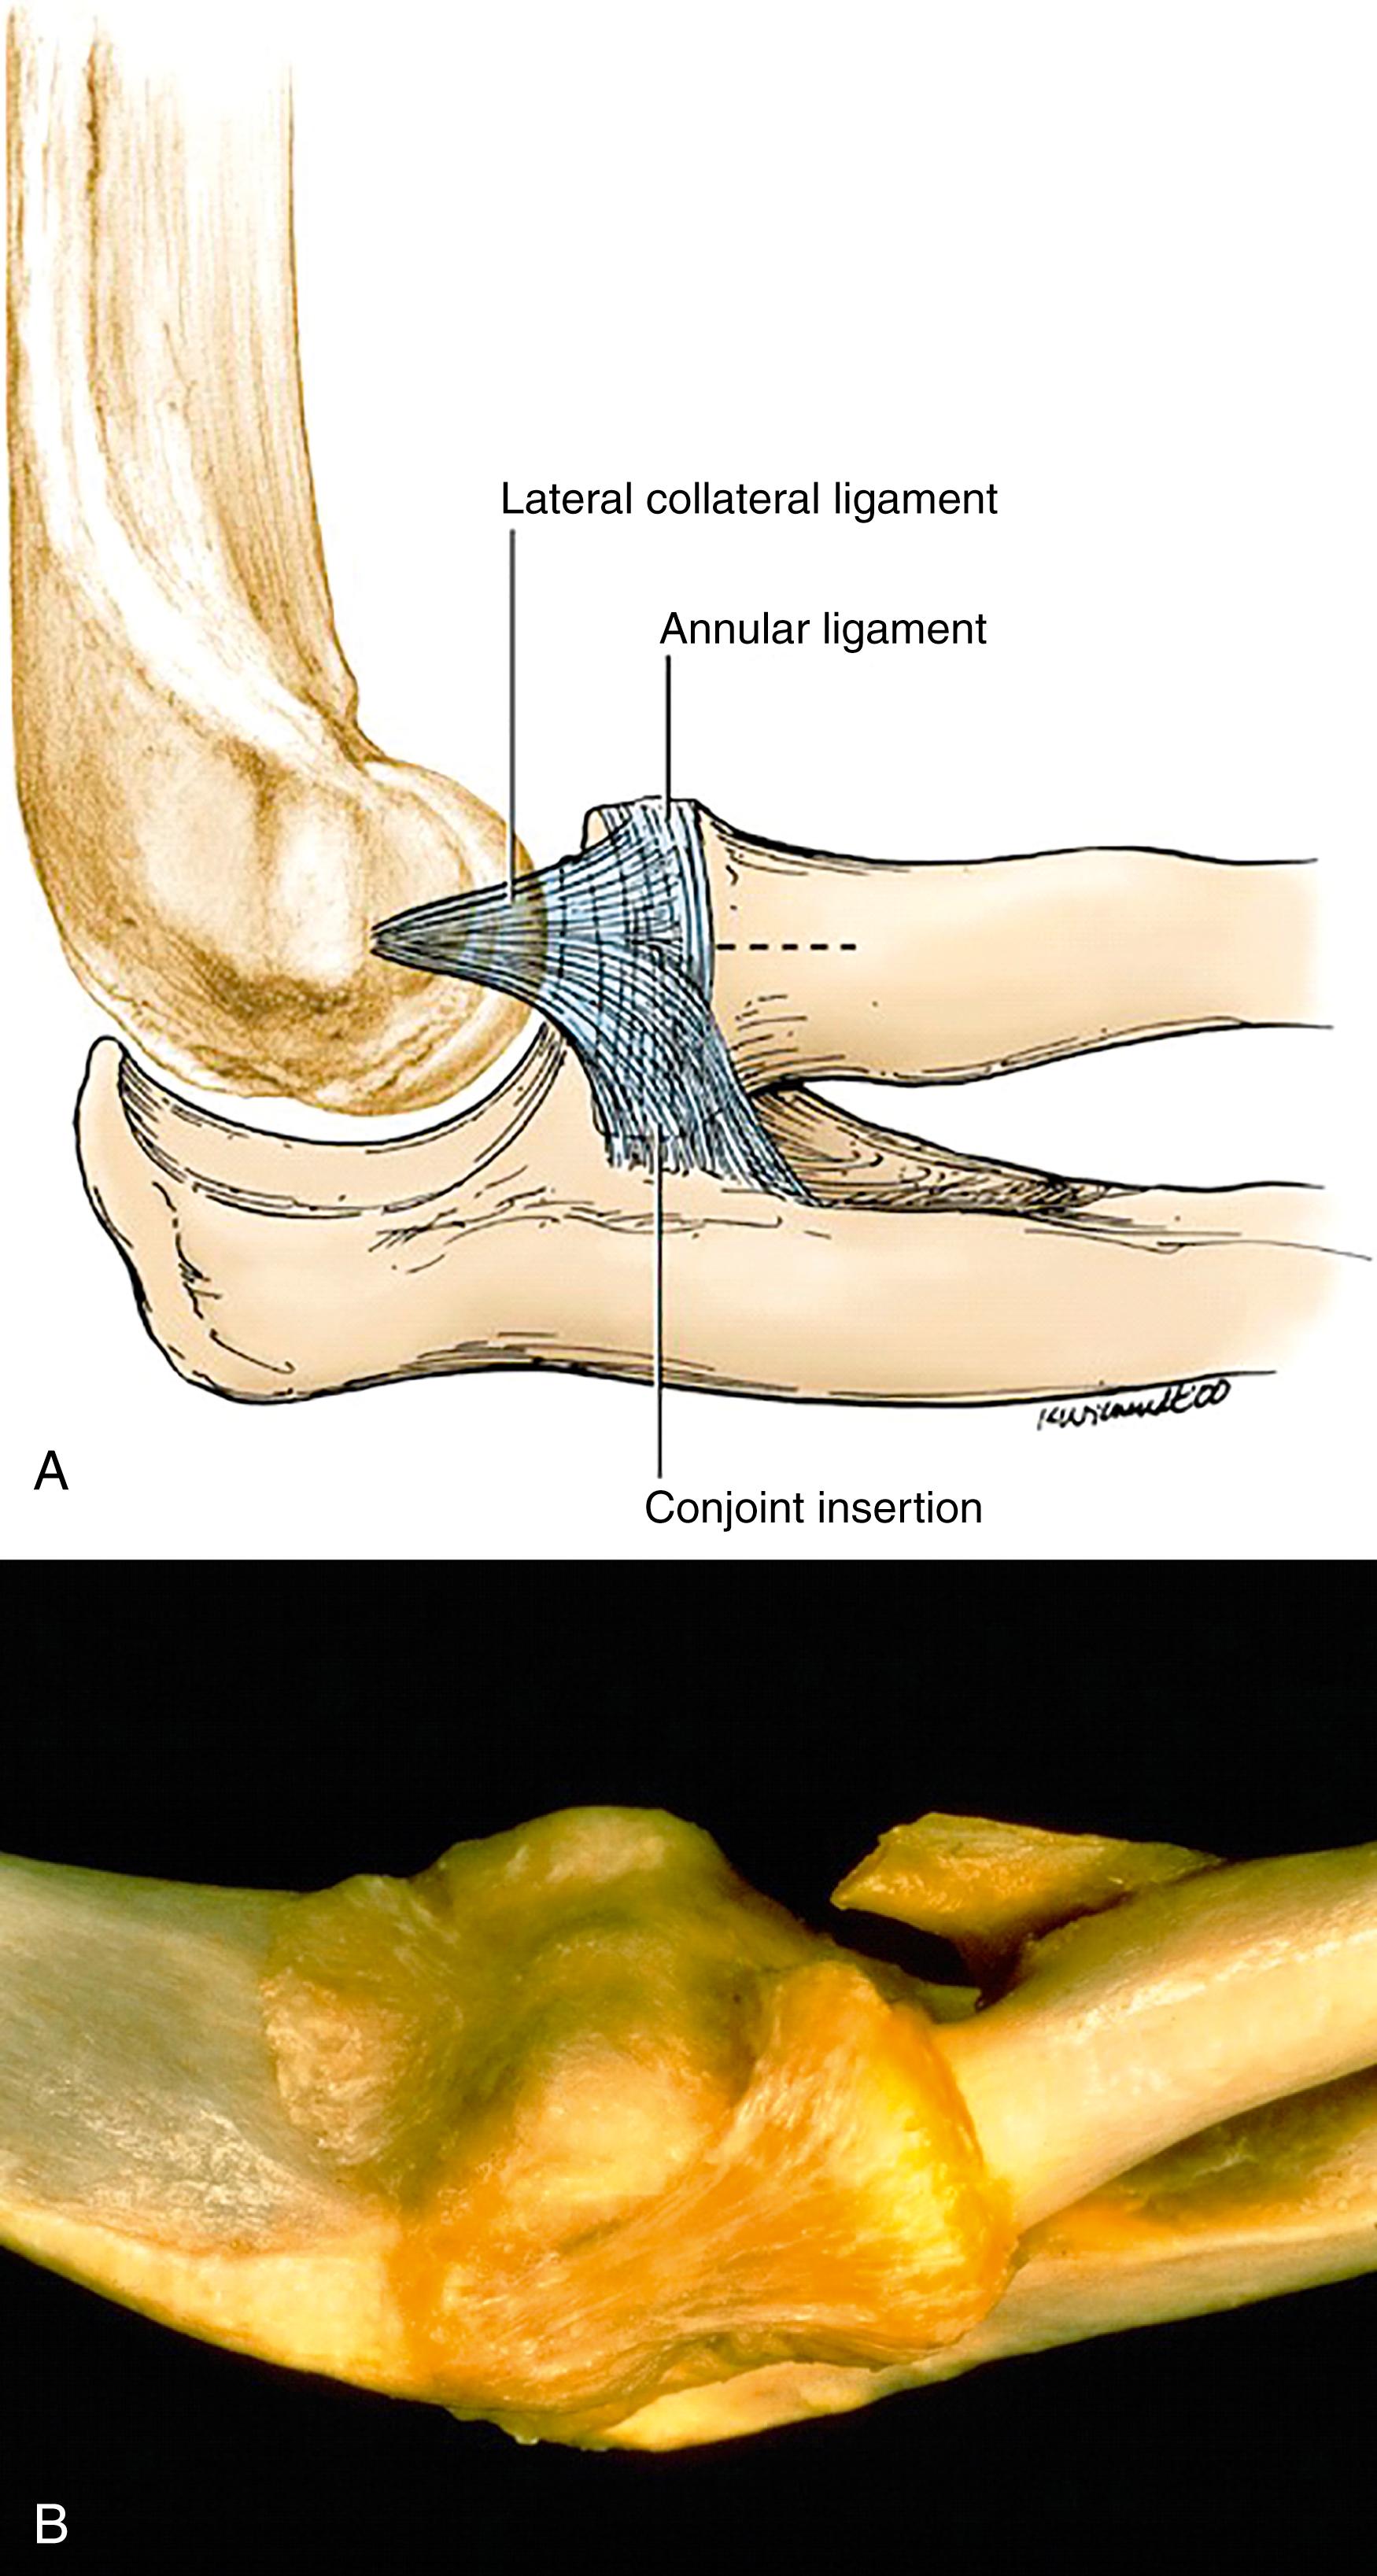 Fig. 23.1, Schematic drawing (A) and cadaveric specimen (B) depicting anatomy of the lateral collateral and annular ligament complex. The overlying extensor muscles and supinator fibers have been removed. The collateral ligament originates at the base of the lateral epicondyle and fans out, blending with the annular ligament anteriorly. The posterior band of the lateral collateral, also known as the lateral ulnar collateral ligament, forms a broad insertion onto the proximal ulna along the supinator crest just posterior and distal to the radioulnar joint.